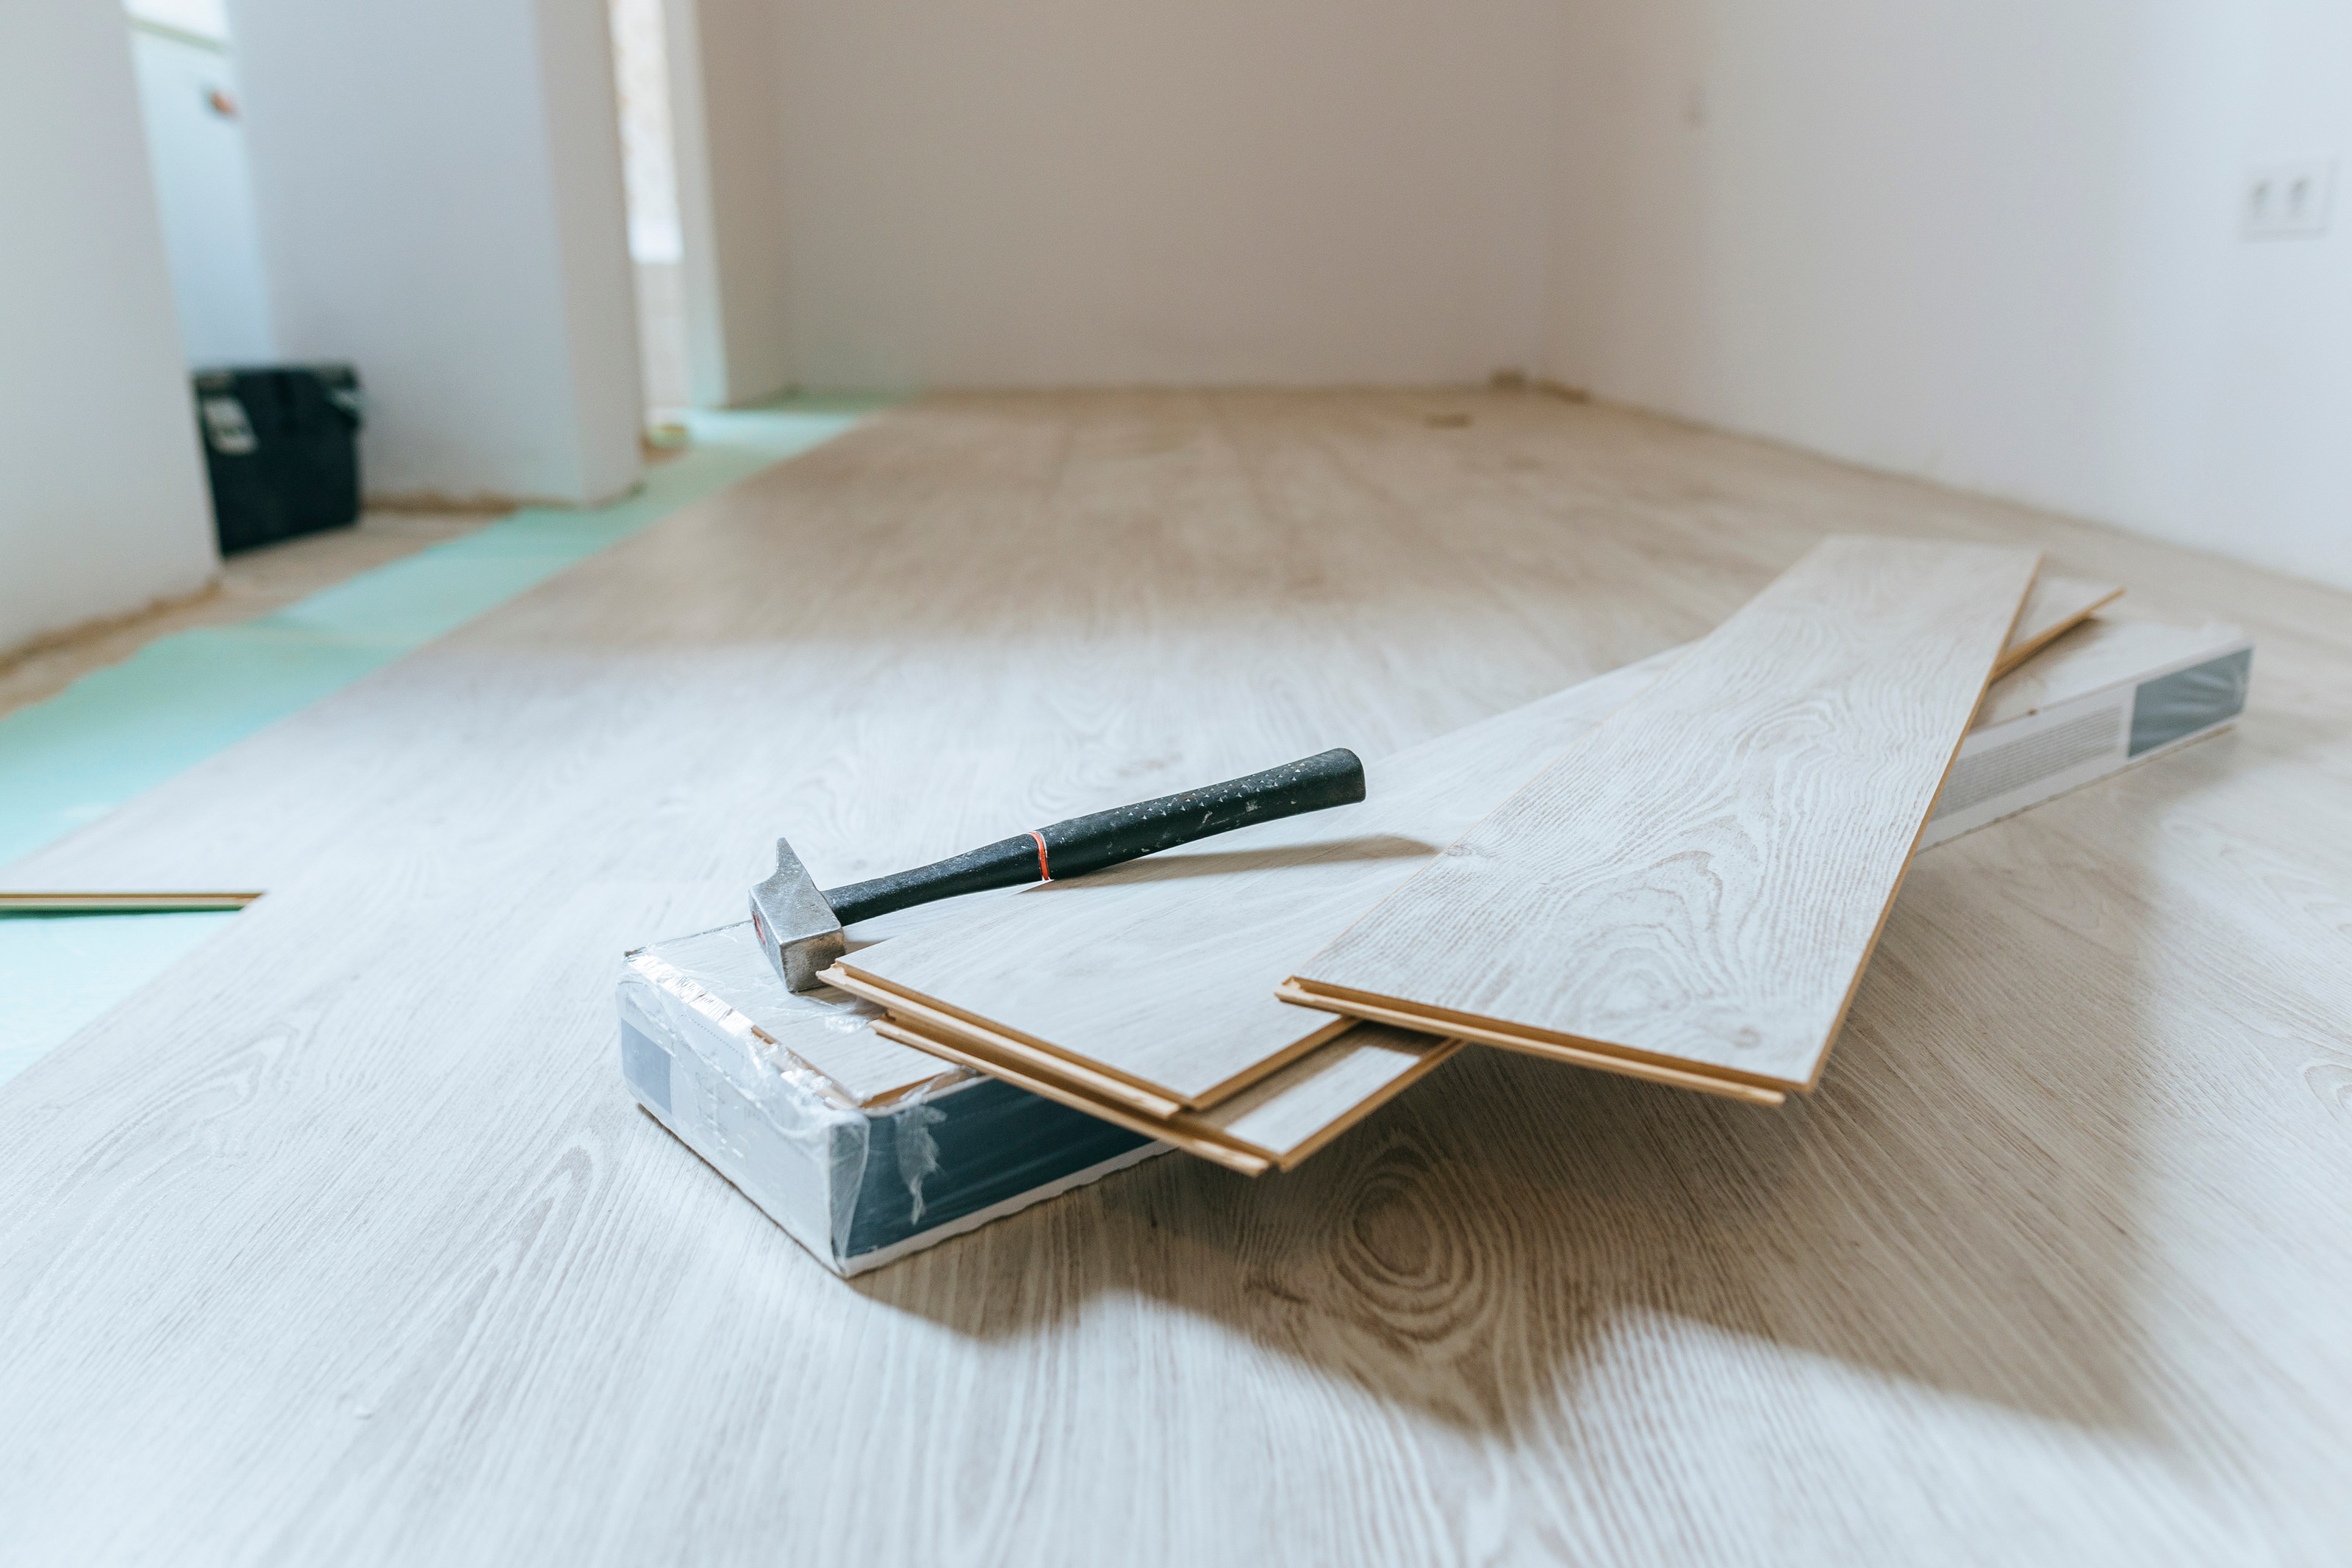 a hammer sits on sheets of wood laminate floor in an empty white room partially finished with blonde color wood grain laminate flooring